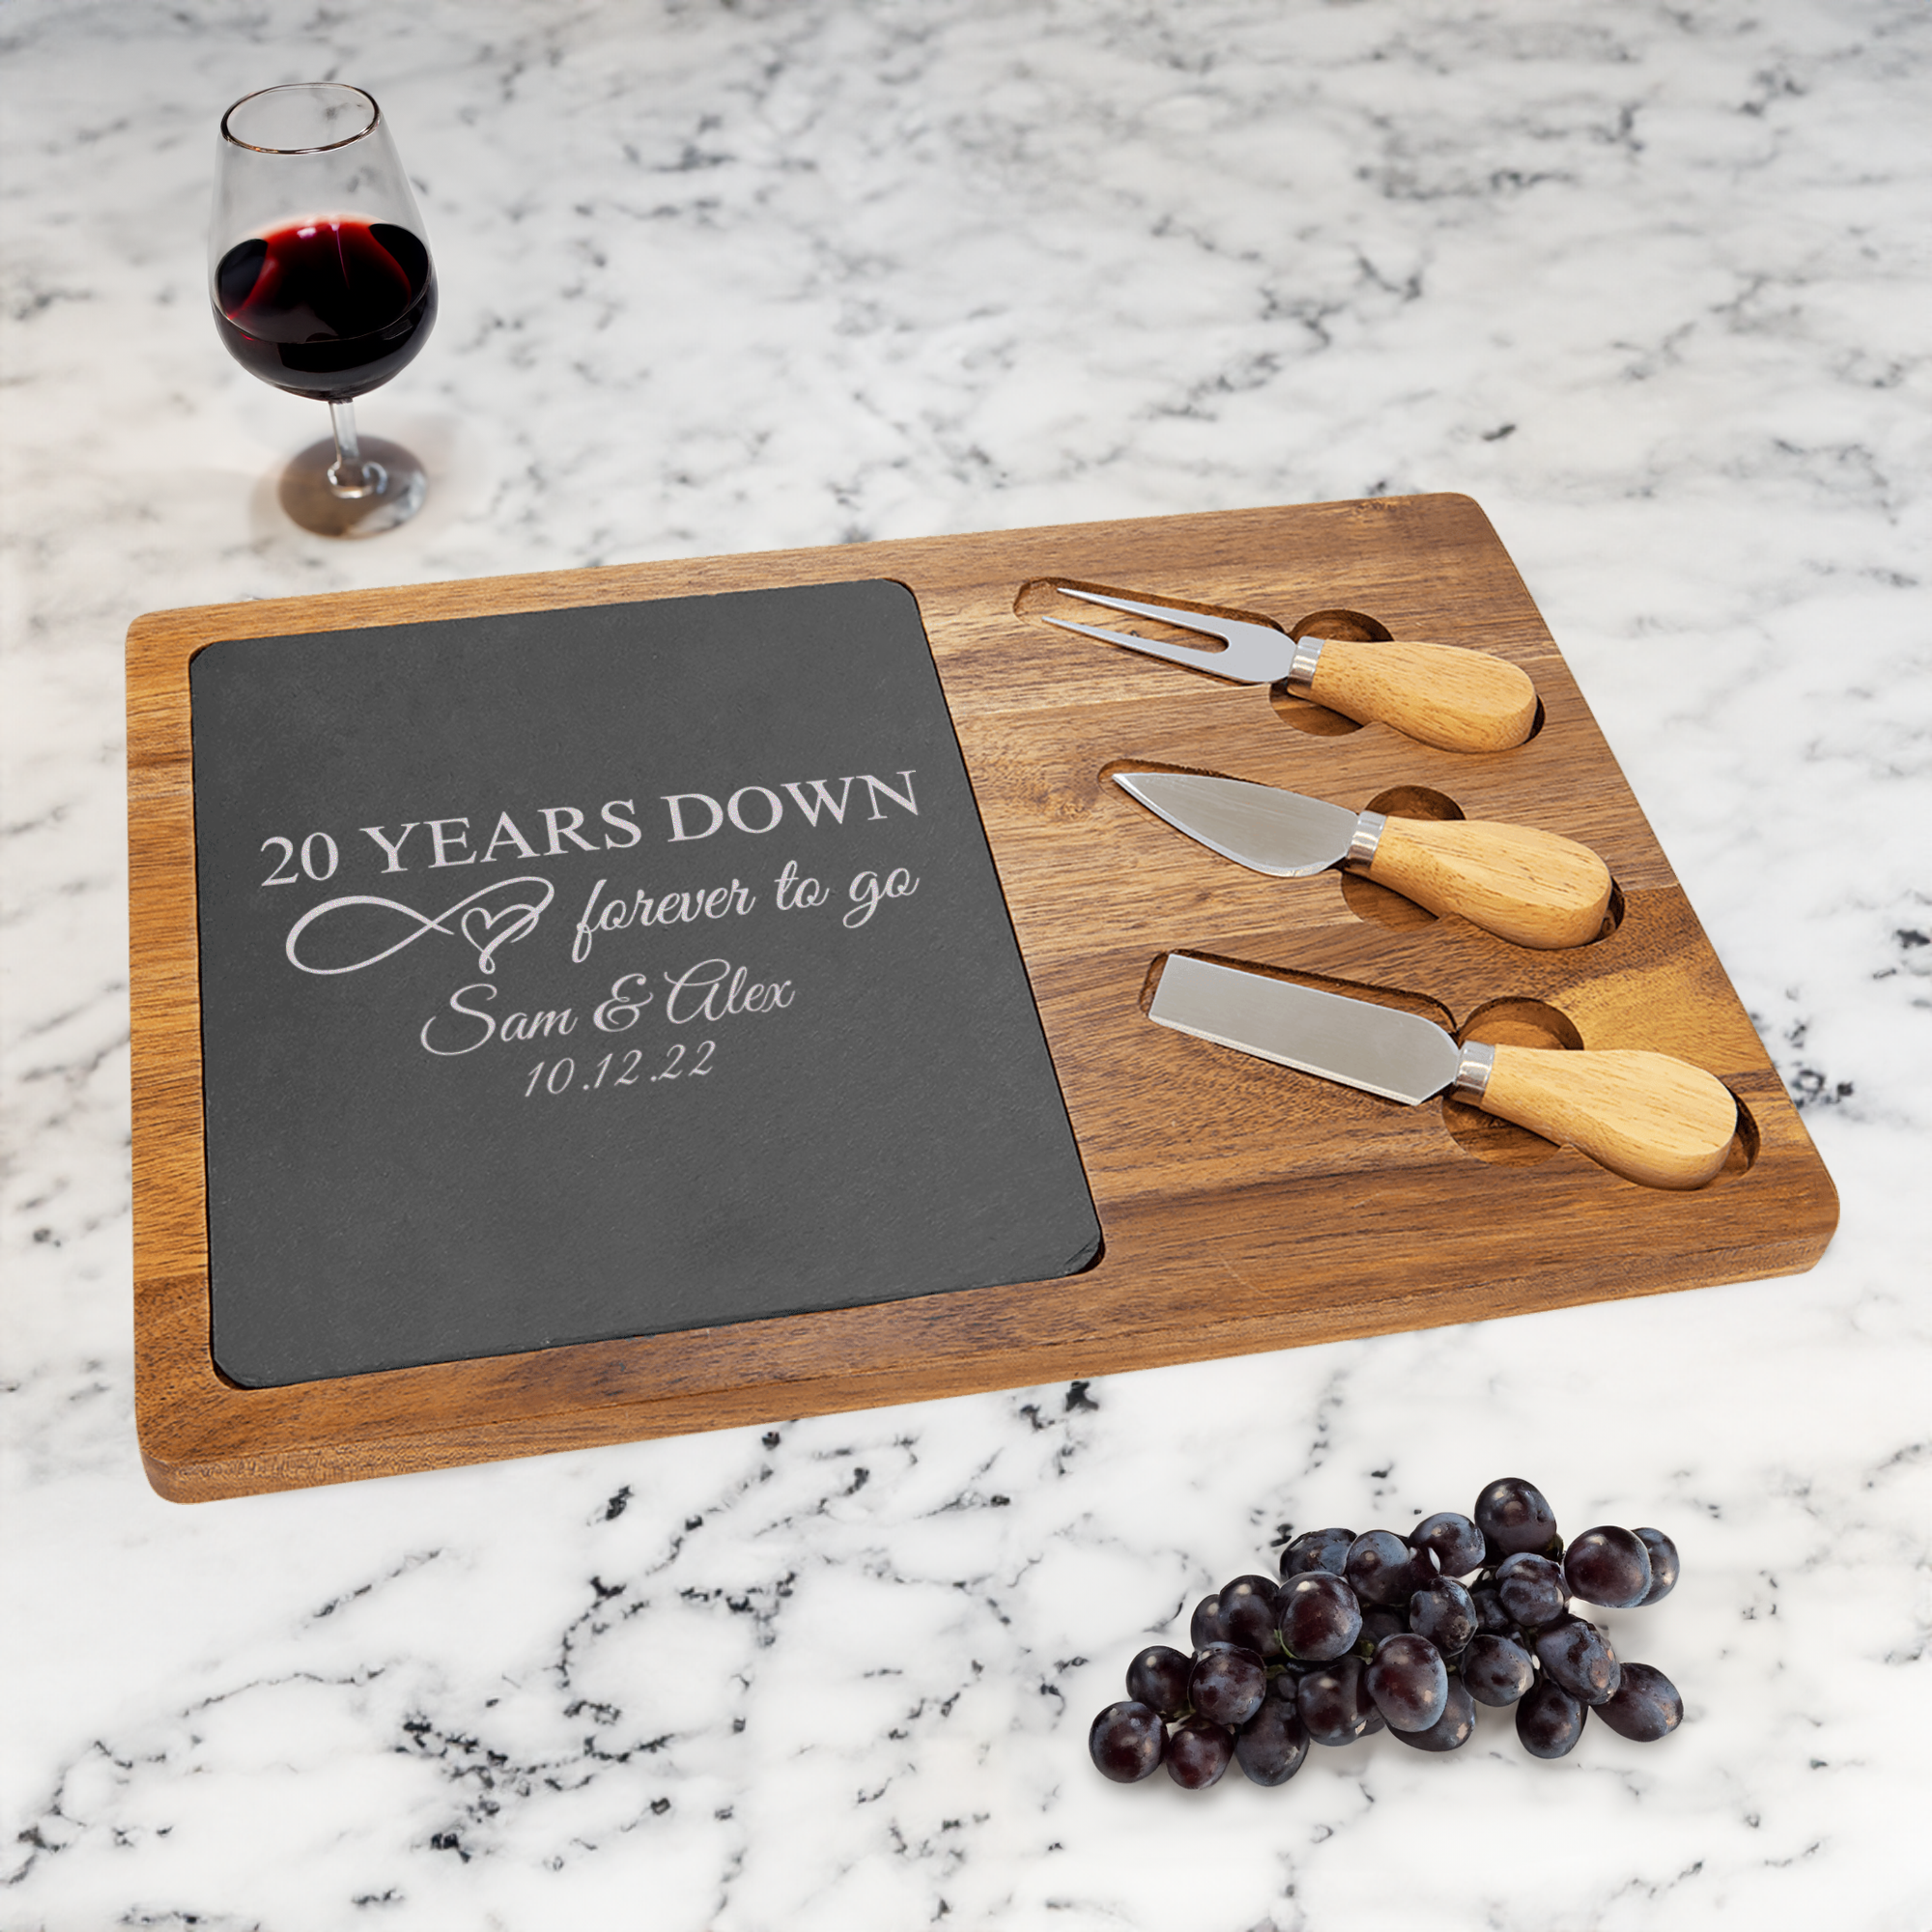 20 Years Down Wood Slate Serving Tray